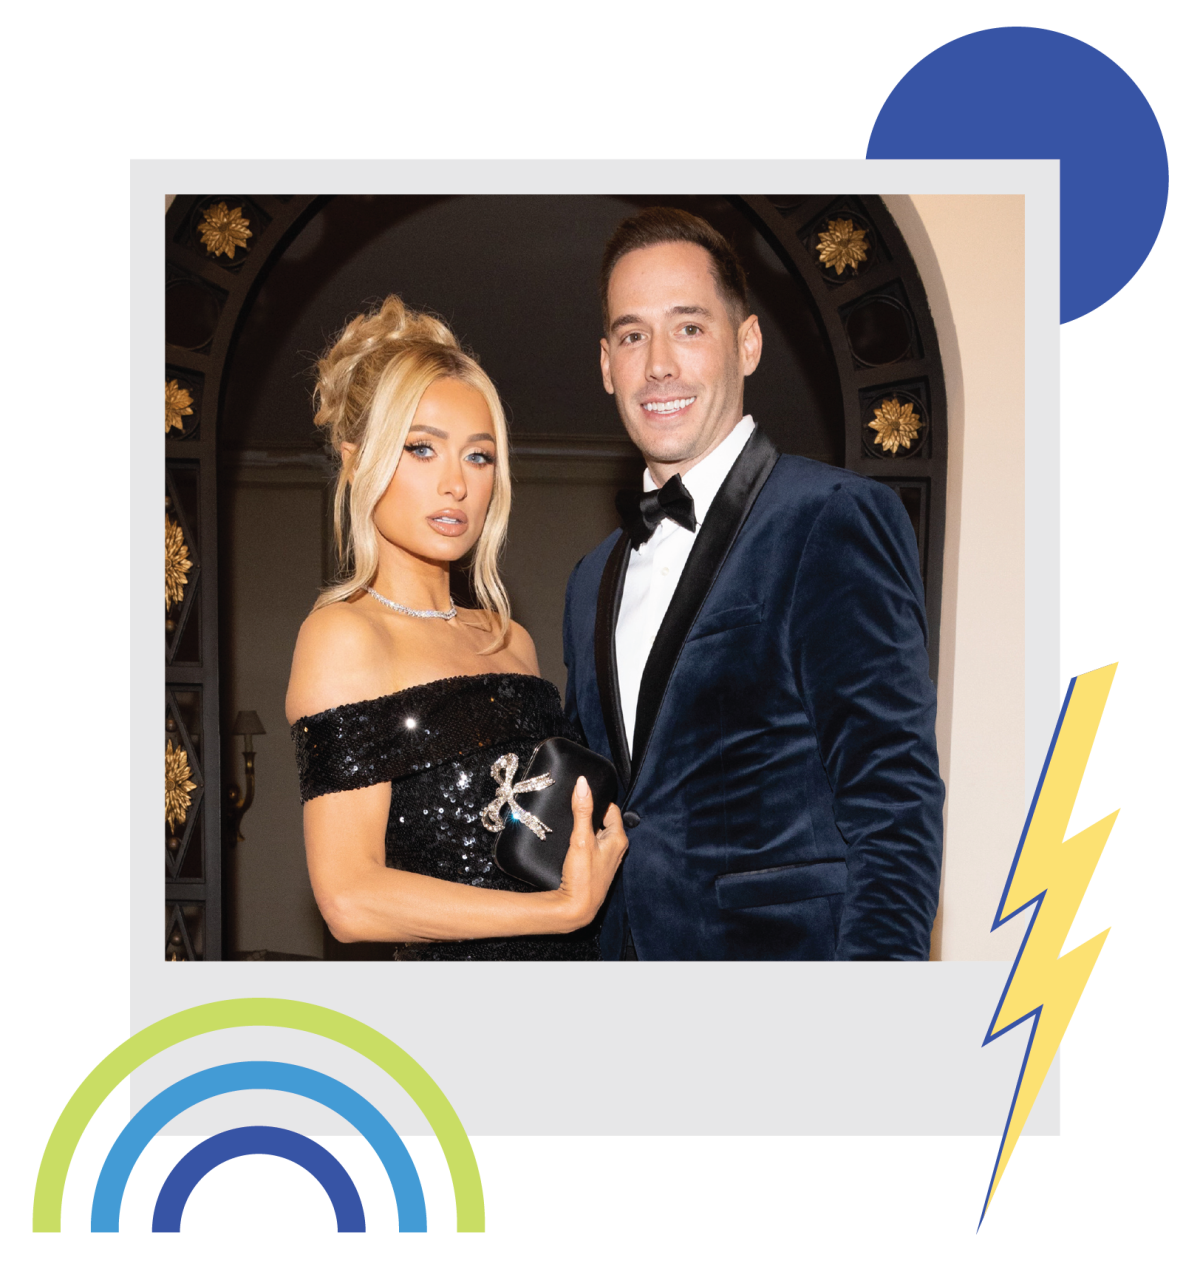 Photo illustration of a polaroid image of a woman and man posing in formal clothes with shapes around: bolt, circle and arcs